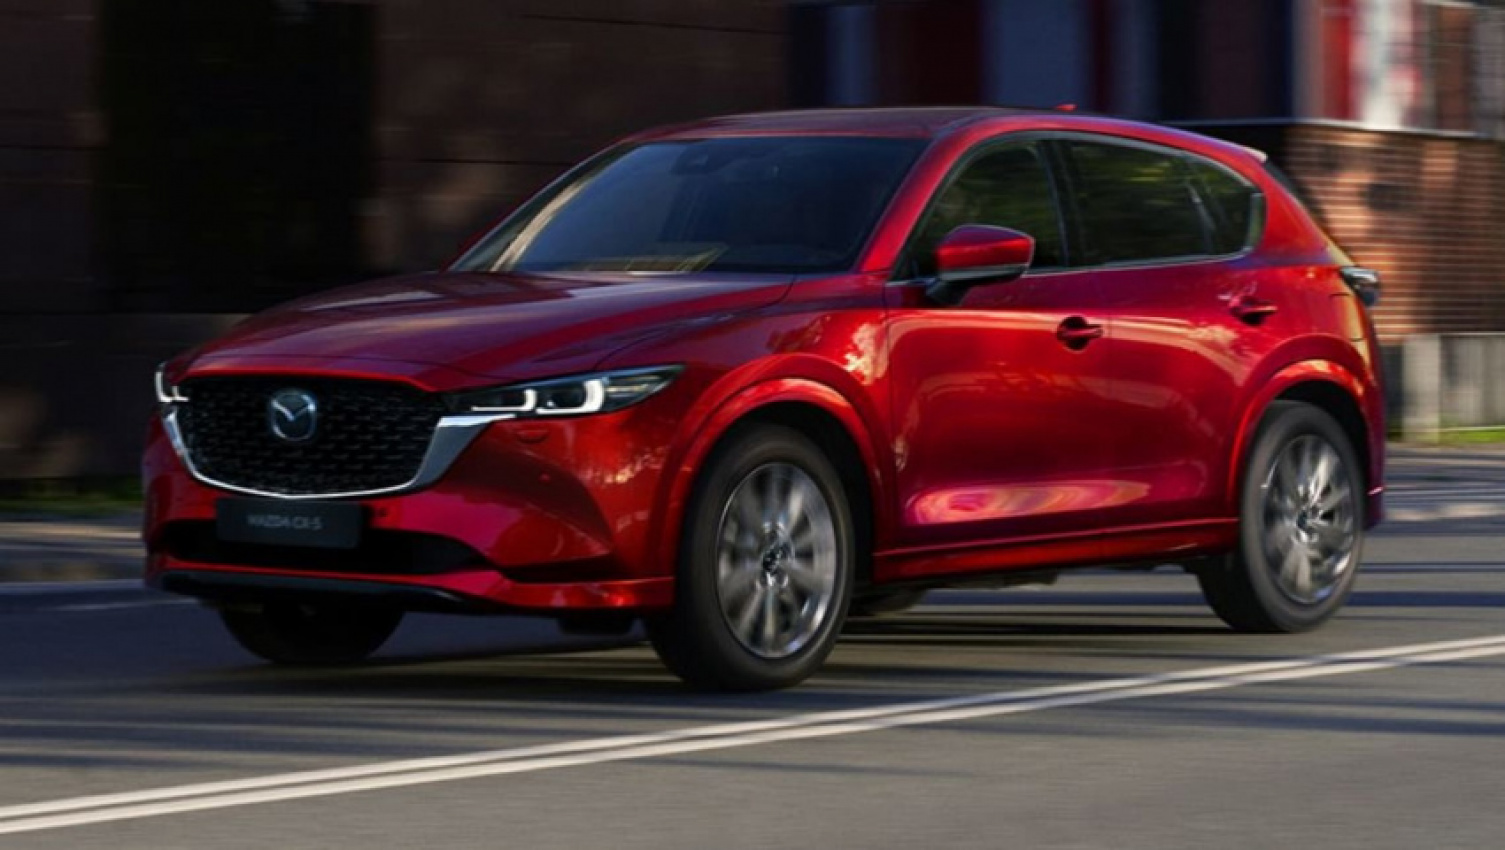 autos, cars, mazda, toyota, hybrid cars, industry news, mazda cx-5, mazda cx-5 2022, mazda news, mazda suv range, showroom news, toyota news, toyota rav4, toyota rav4 2022, toyota suv range, why 2022 mazda cx-5 is well positioned to narrow gap and truly challenge toyota rav4 for title of australia's best-selling suv this year